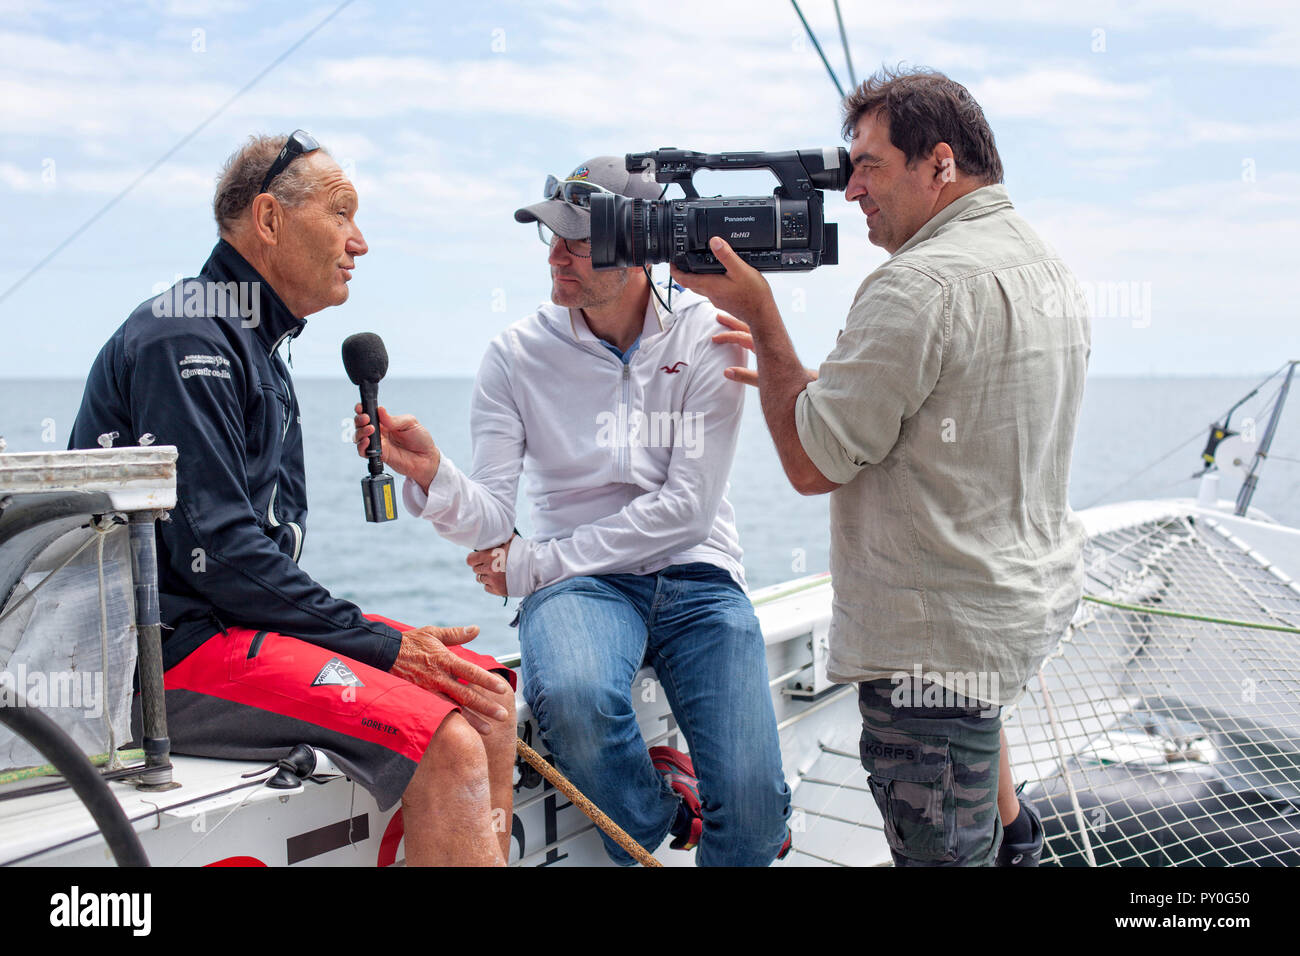 Onboard the trimaran IDEC SPORT skippered by Francis Joyon, preparing to take part in La Route du Rhum destination Guadeloupe, the fortieth edition of which starts from St. Malo on 4th November, La Trinite-sur-Mer, Brittany, France Stock Photo